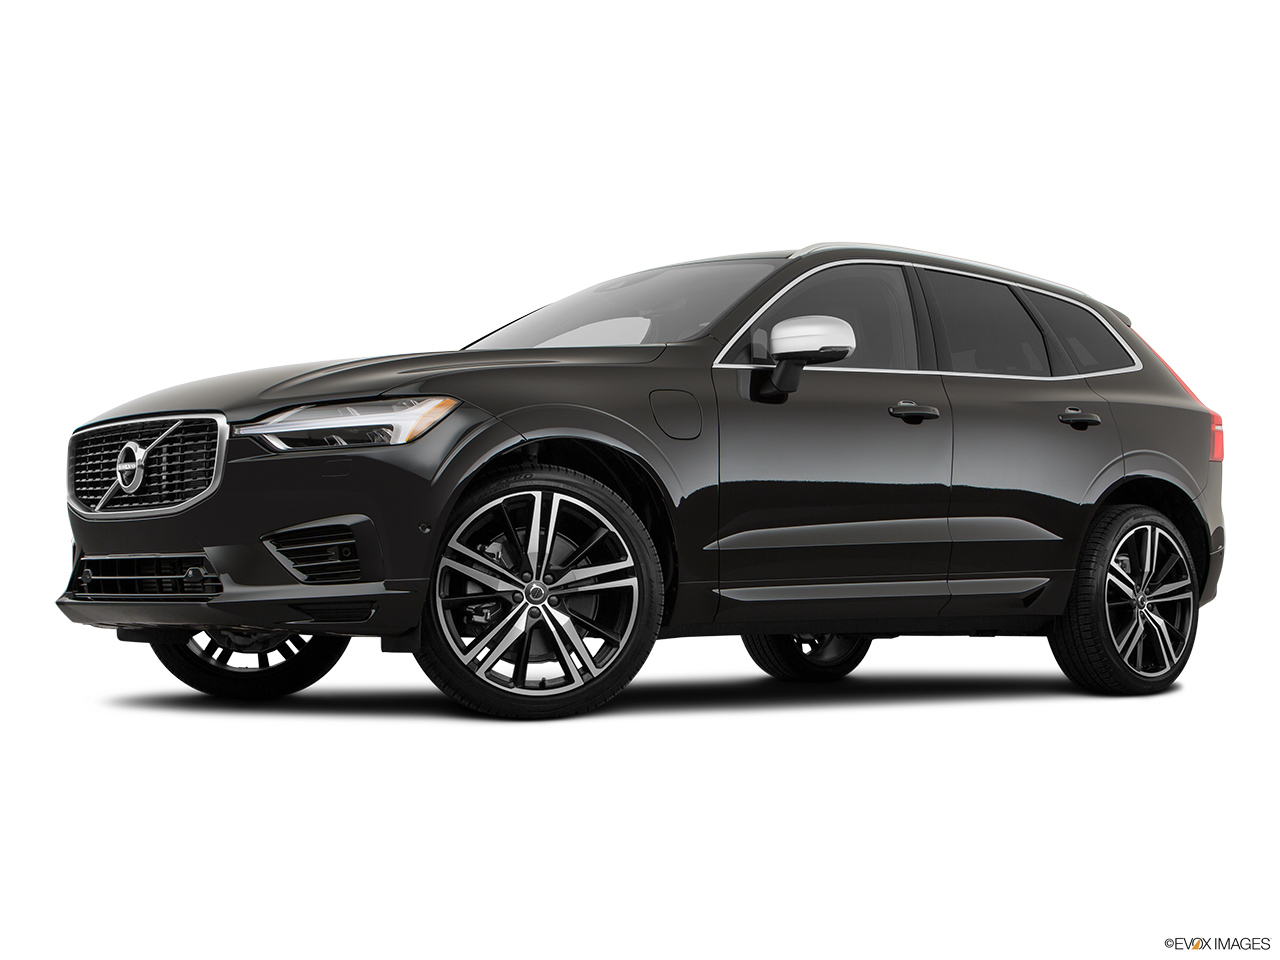 2019 Volvo XC60 T8 R-Design eAWD Plug-in Hybrid Low/wide front 5/8. 